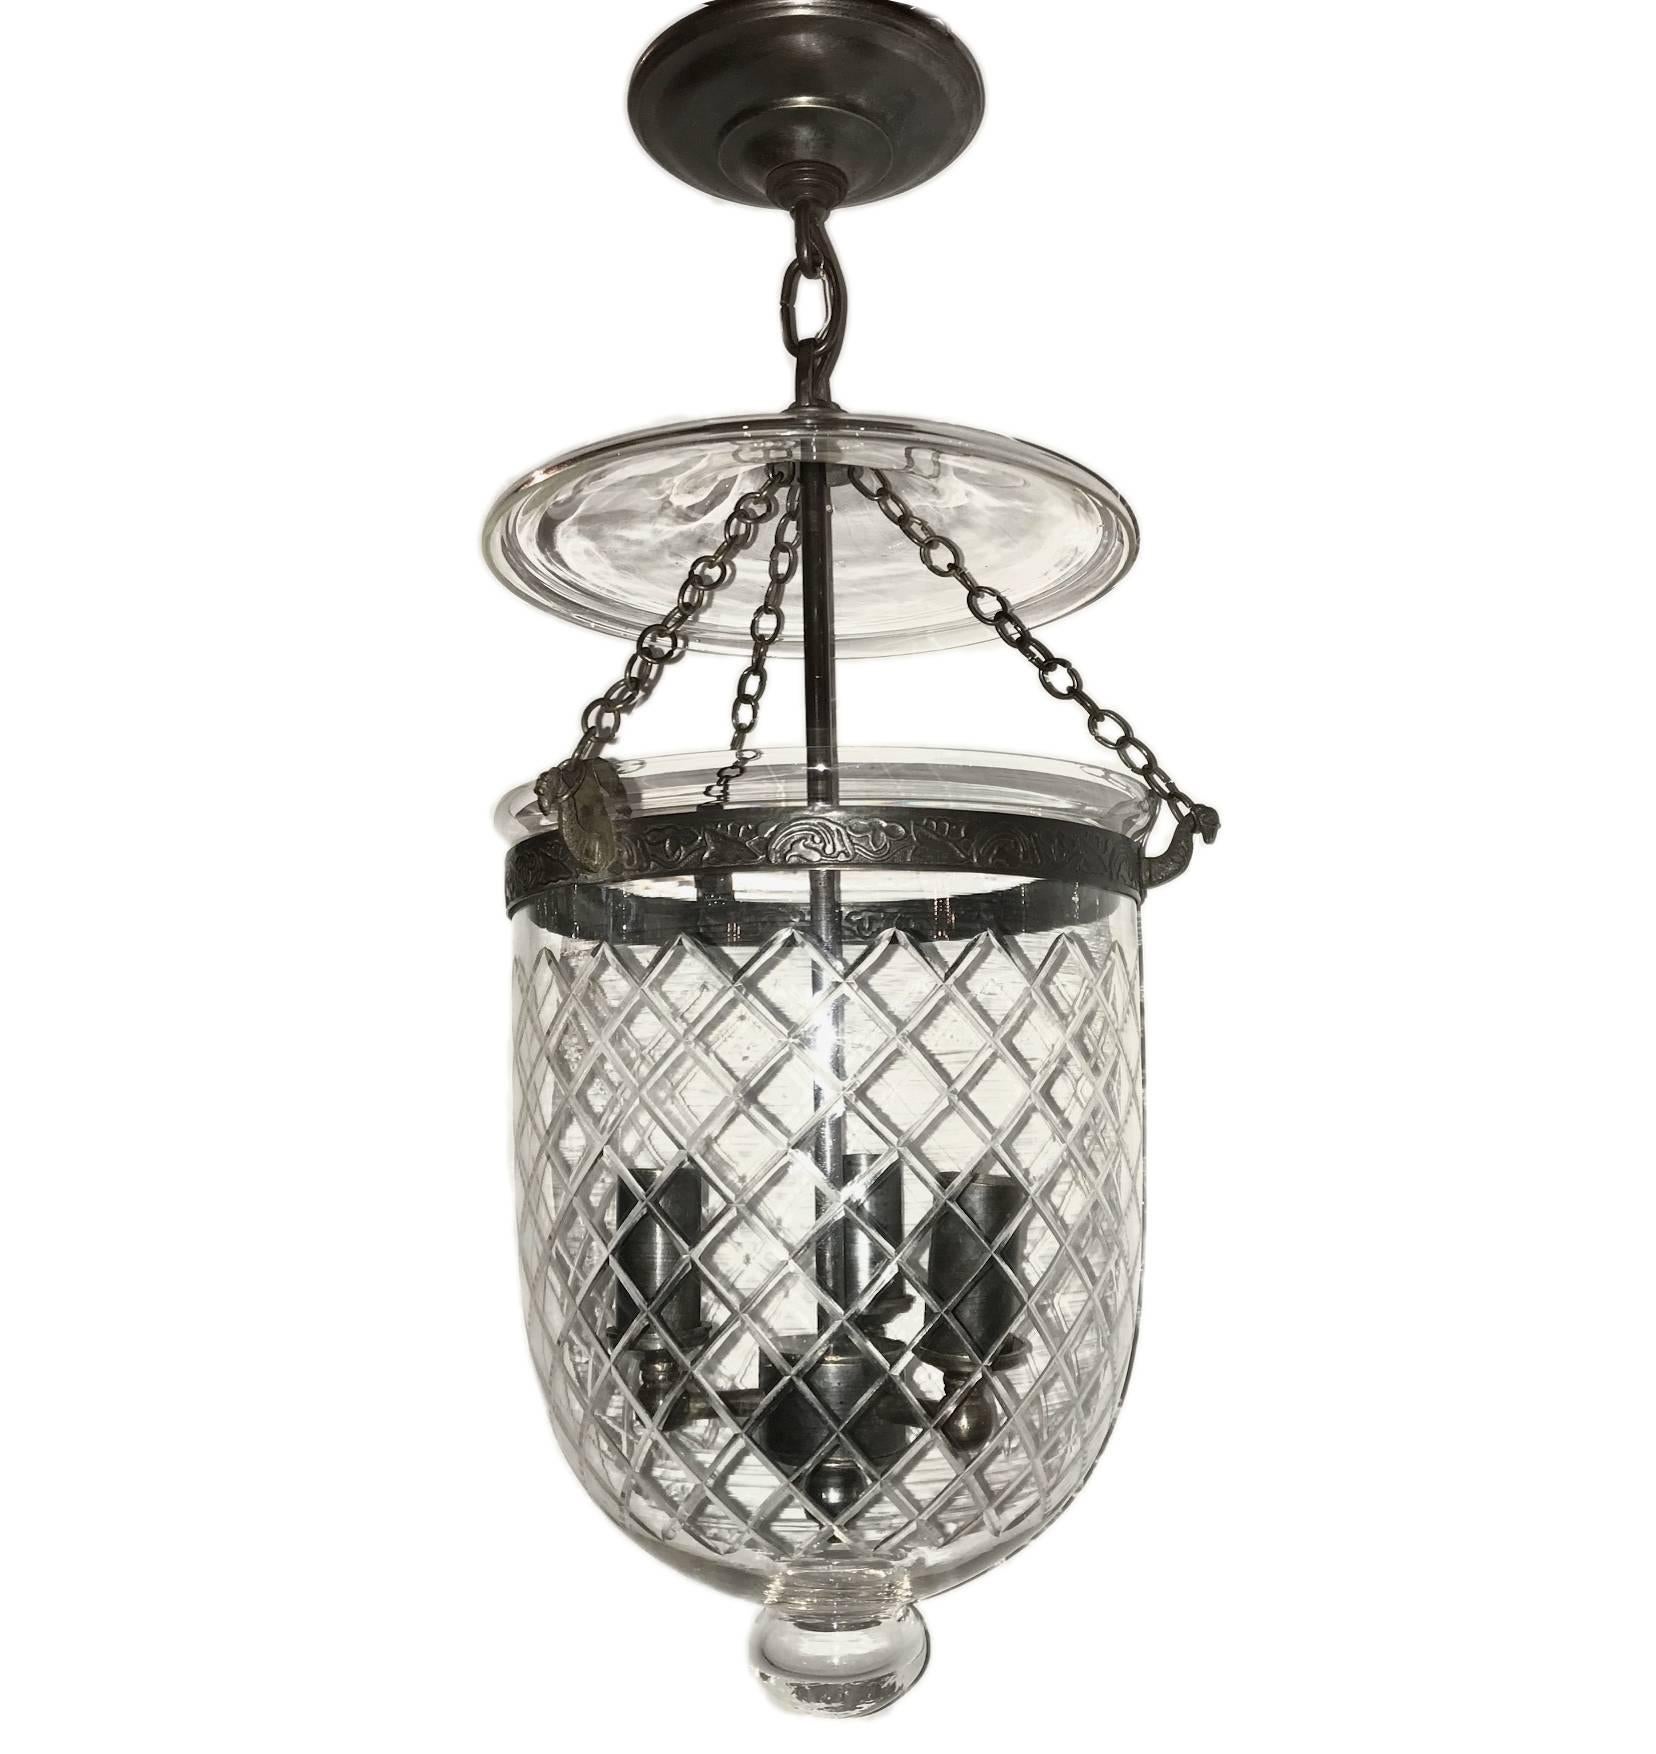 A set of etched glass lantern circa 1910 with criss cross pattern, three interior candelabra lights. 
Original smoke bell.

Priced individually.

Measures: 
10